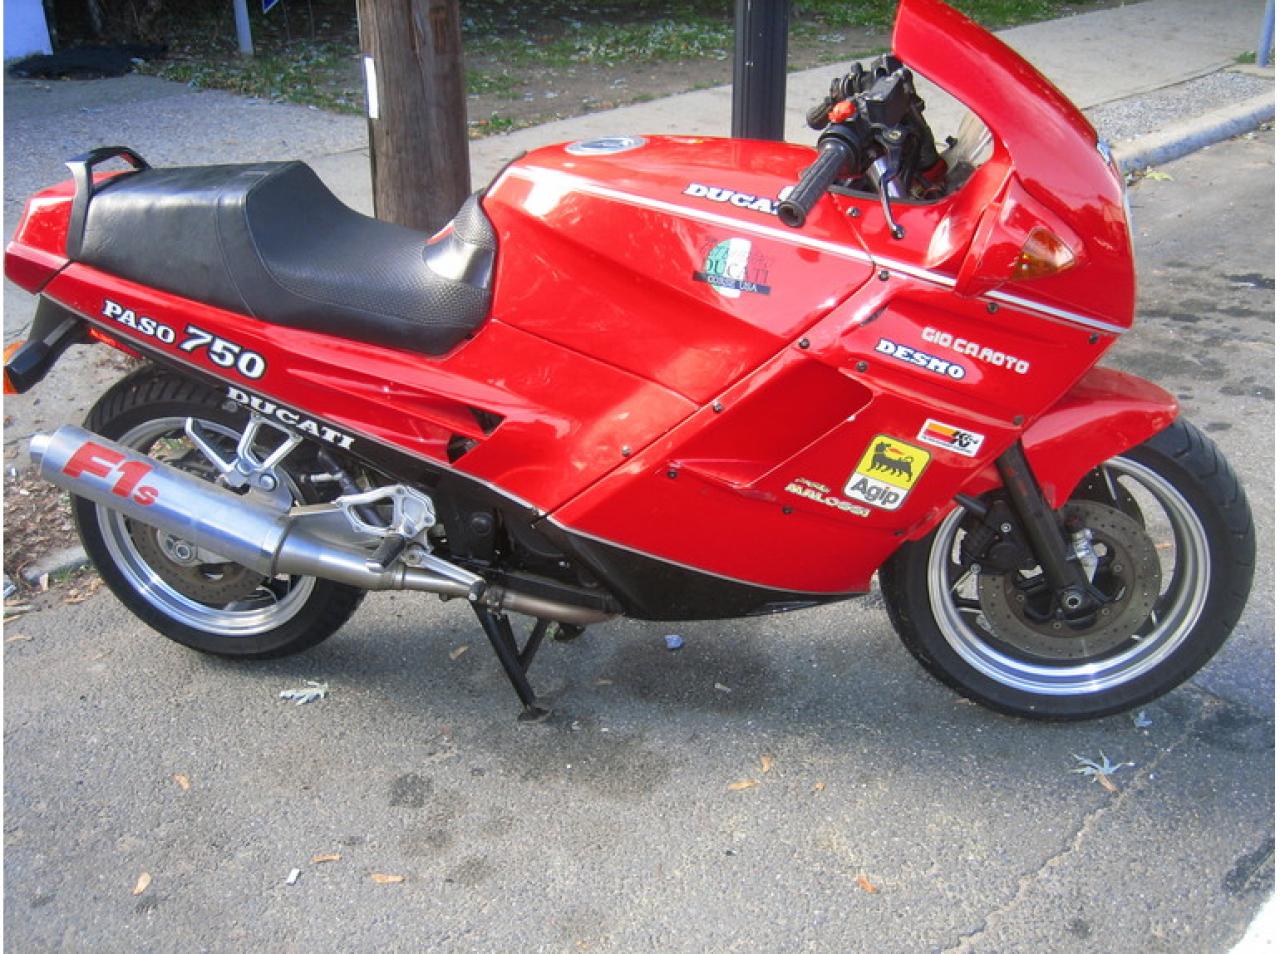 Review of Ducati 750 Paso 1987 pictures, live photos